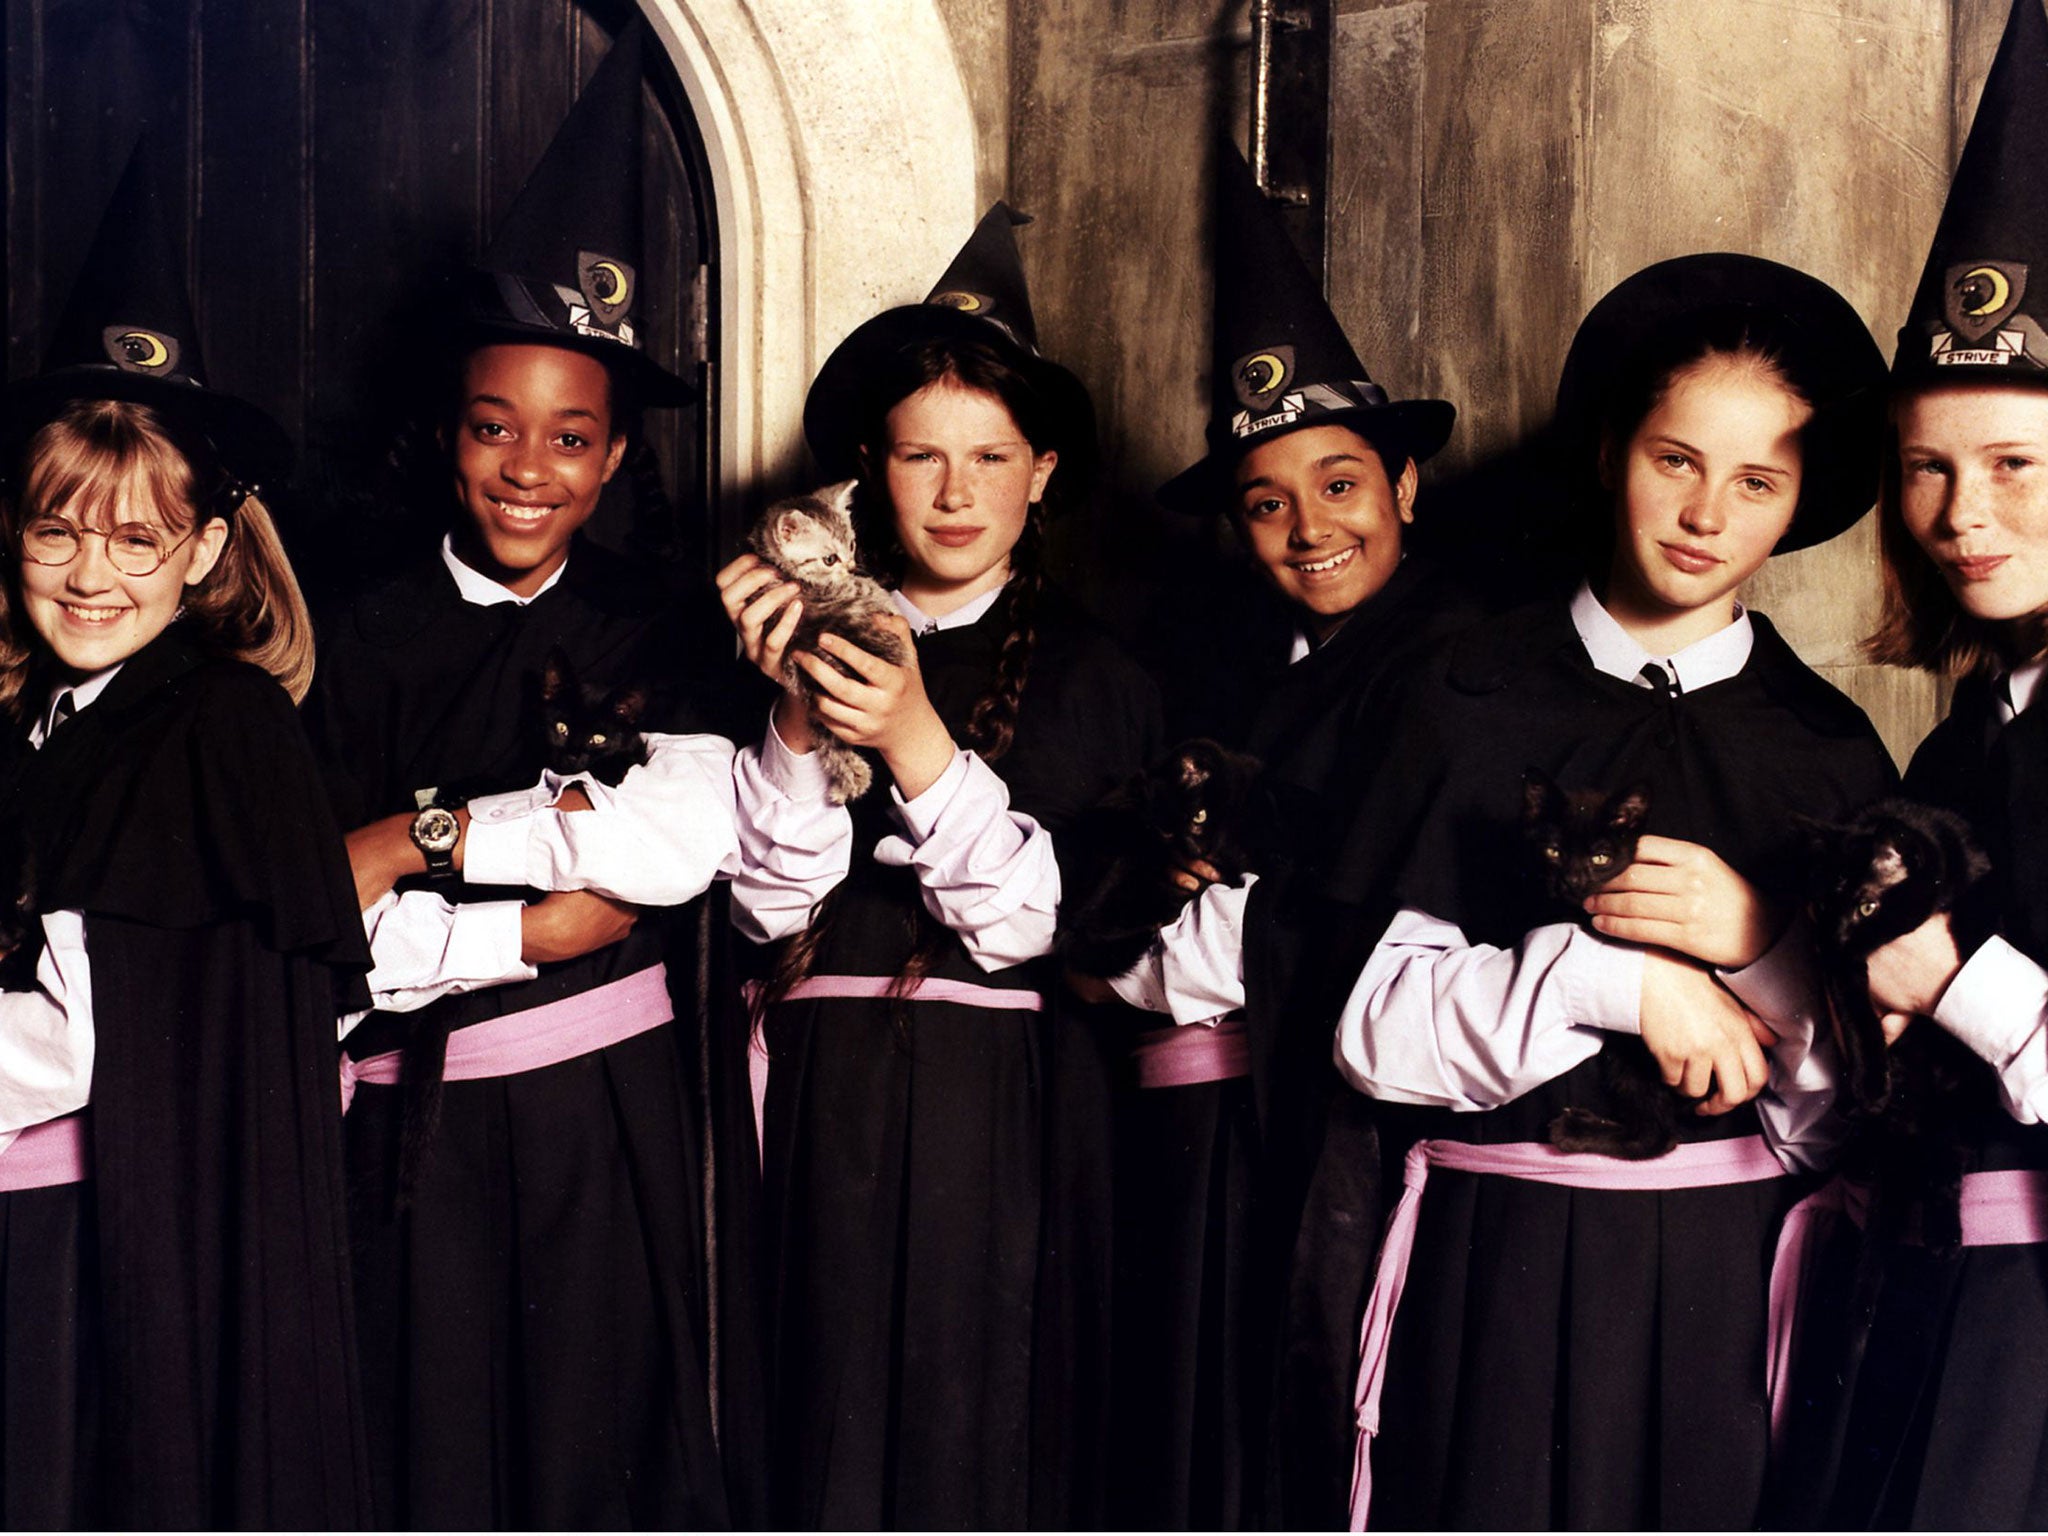 The cast of The Worst Witch, which aired on CITV in the Nineties